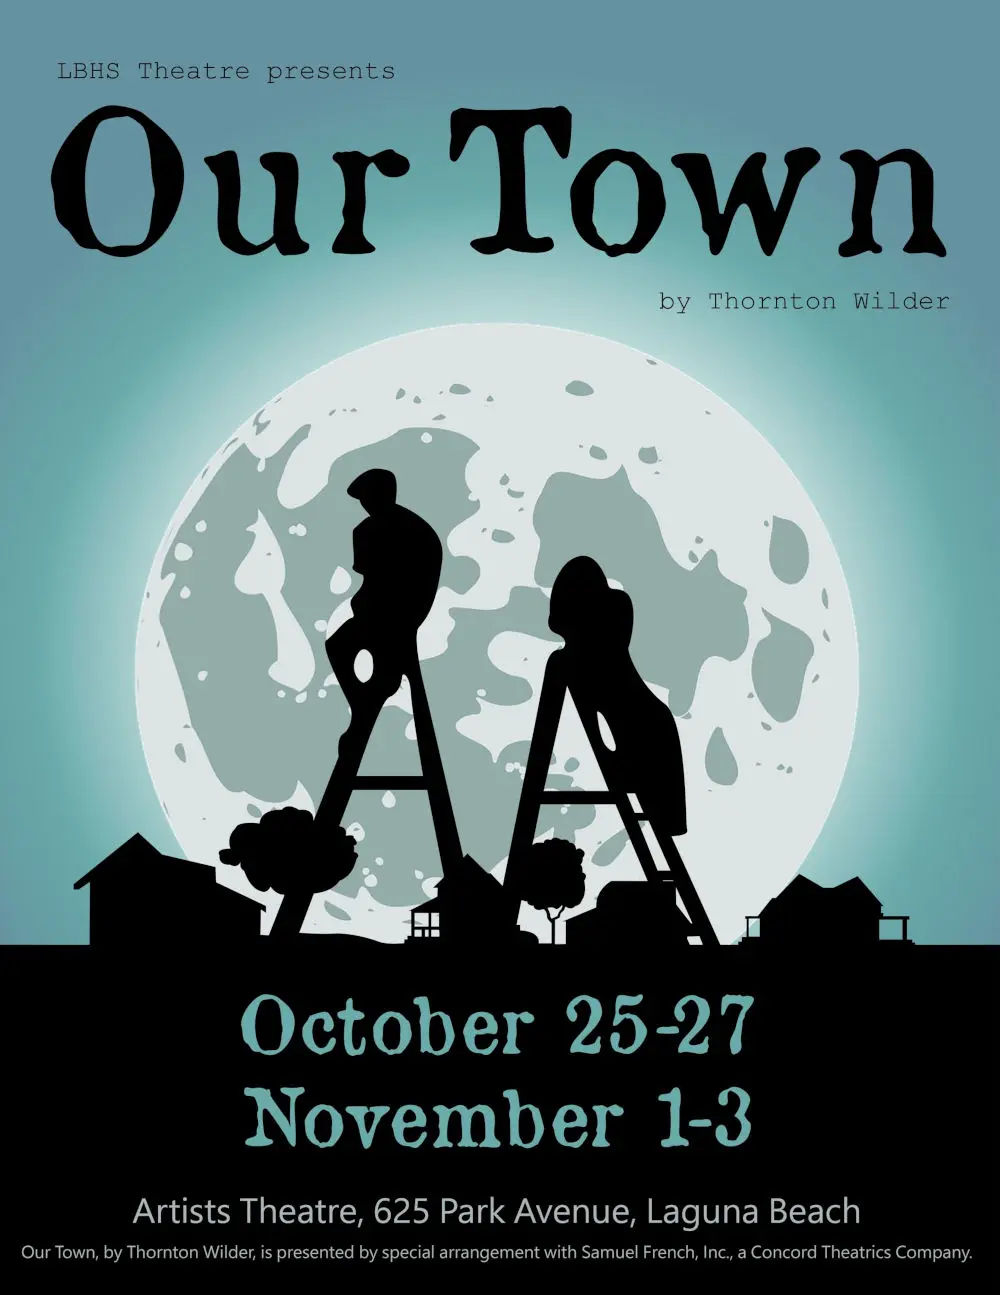 Flyer for Our Town (2020) at Laguna Beach Artists' Theatre.